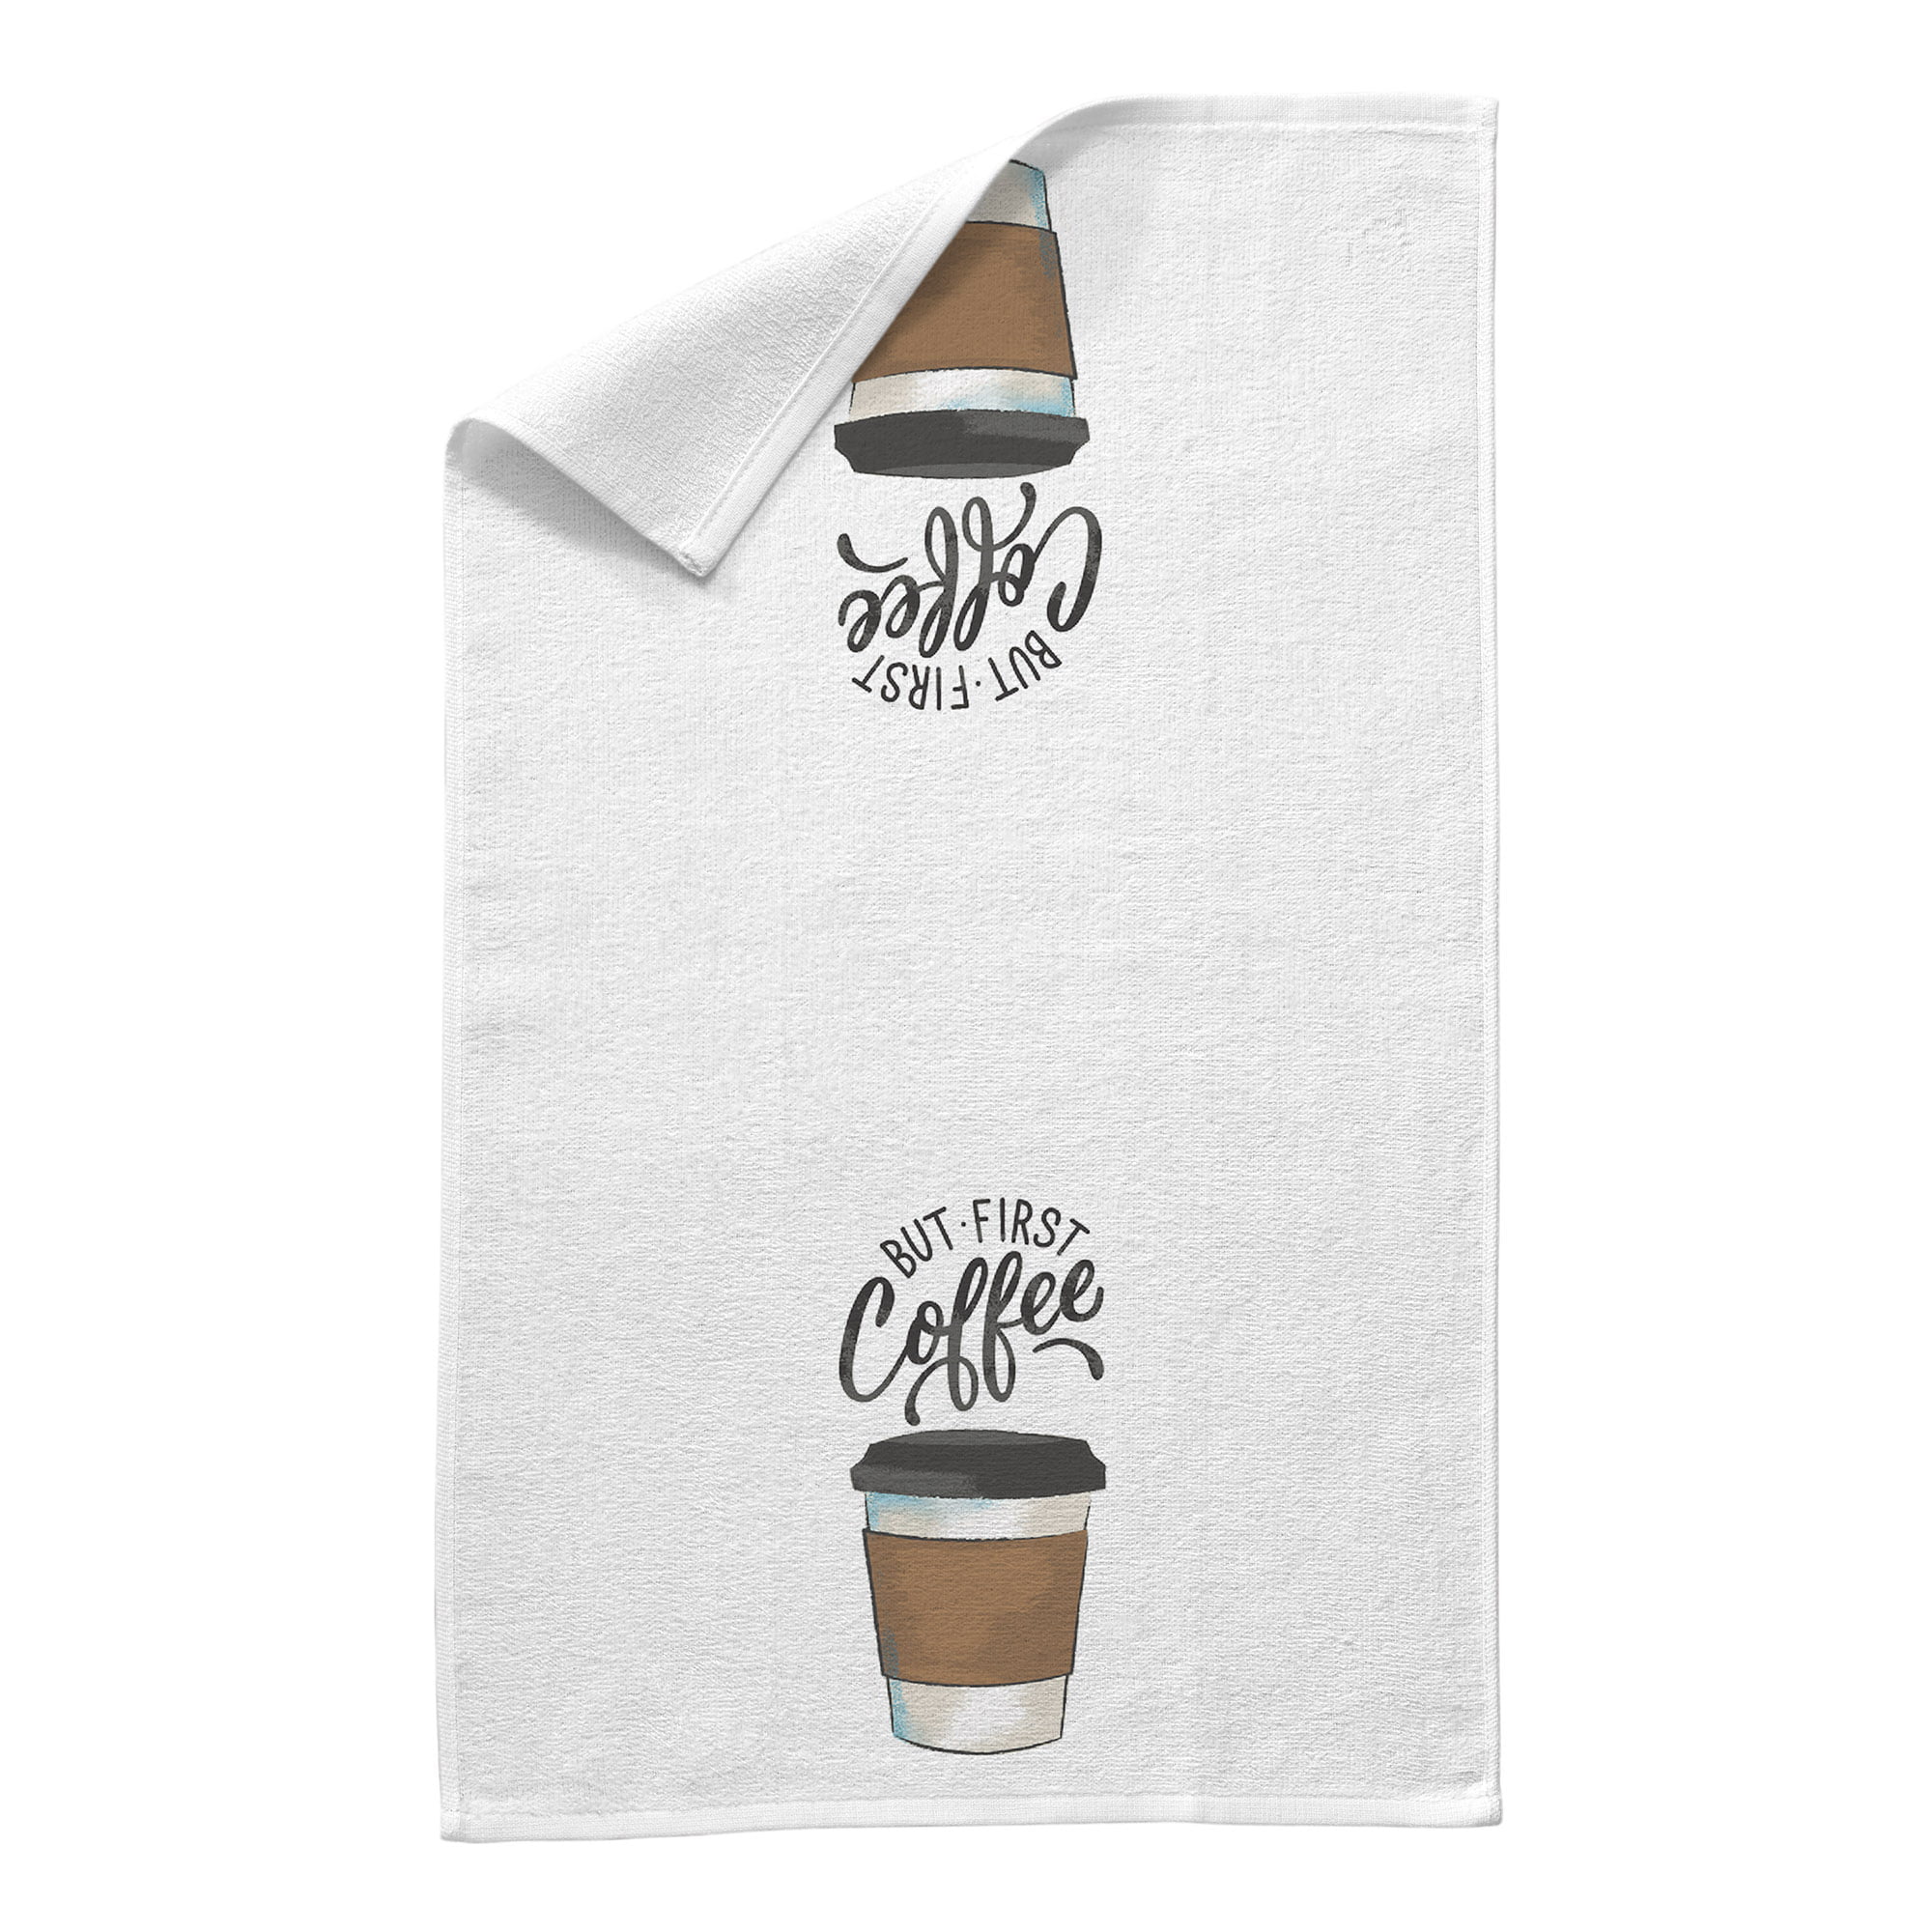 T-fal Brown Coffee Cups Print Dual Cotton Kitchen Towel Set (Set of 2)  62459A - The Home Depot